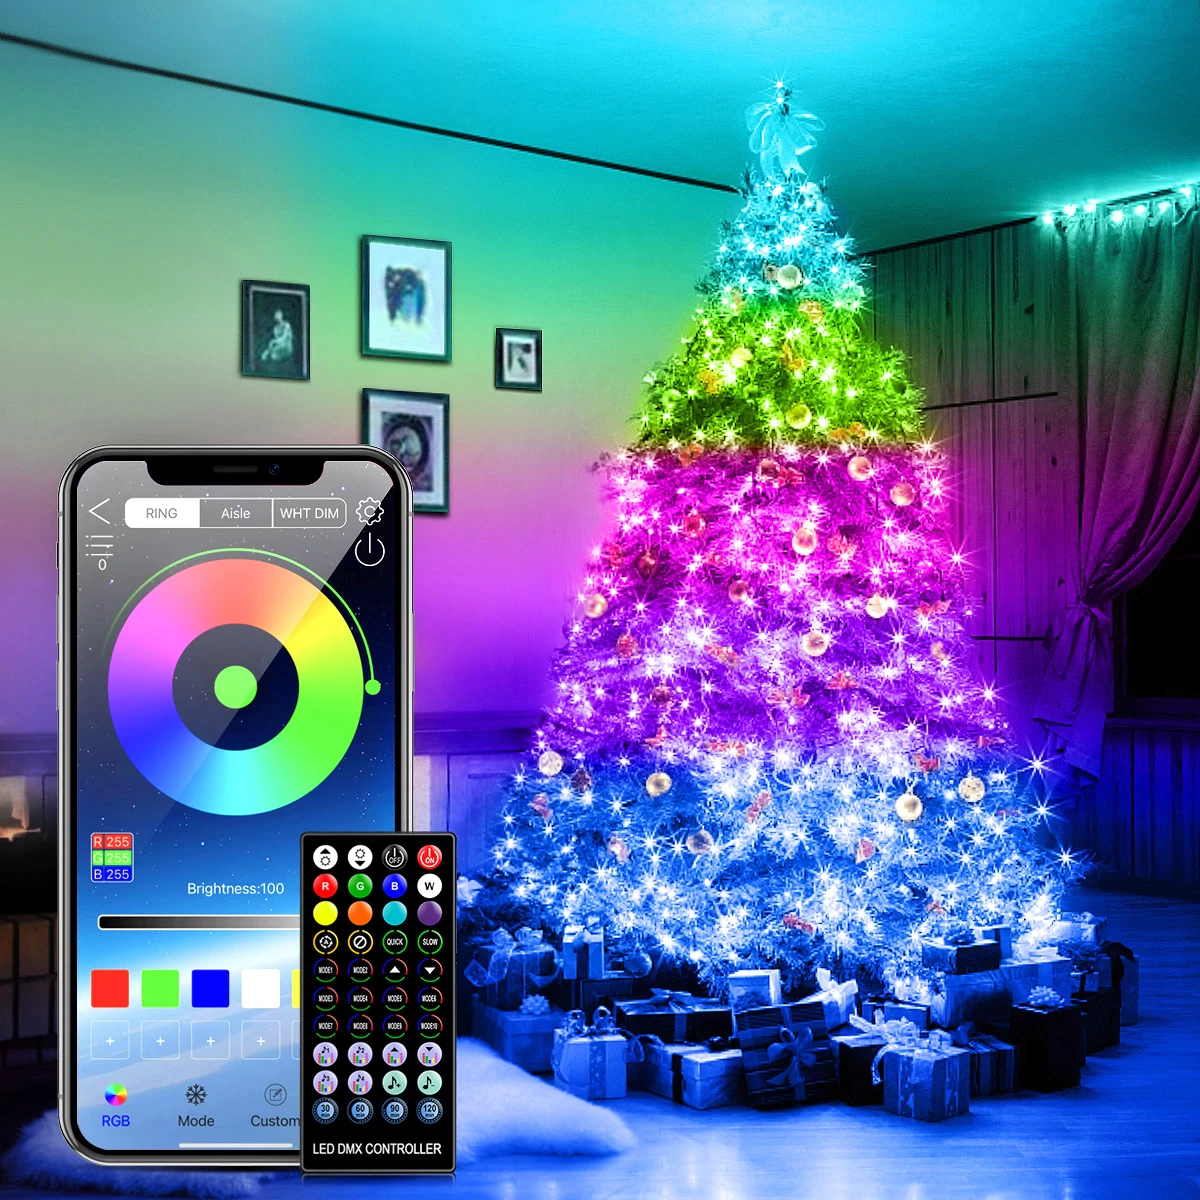 With-Bluetooth-Controller-Dream-Color-LED-Lights-String-USB-RGB-Fairy-Lights-Outdoor-Garden-New-Year.jpg_Q90.jpg_.webp